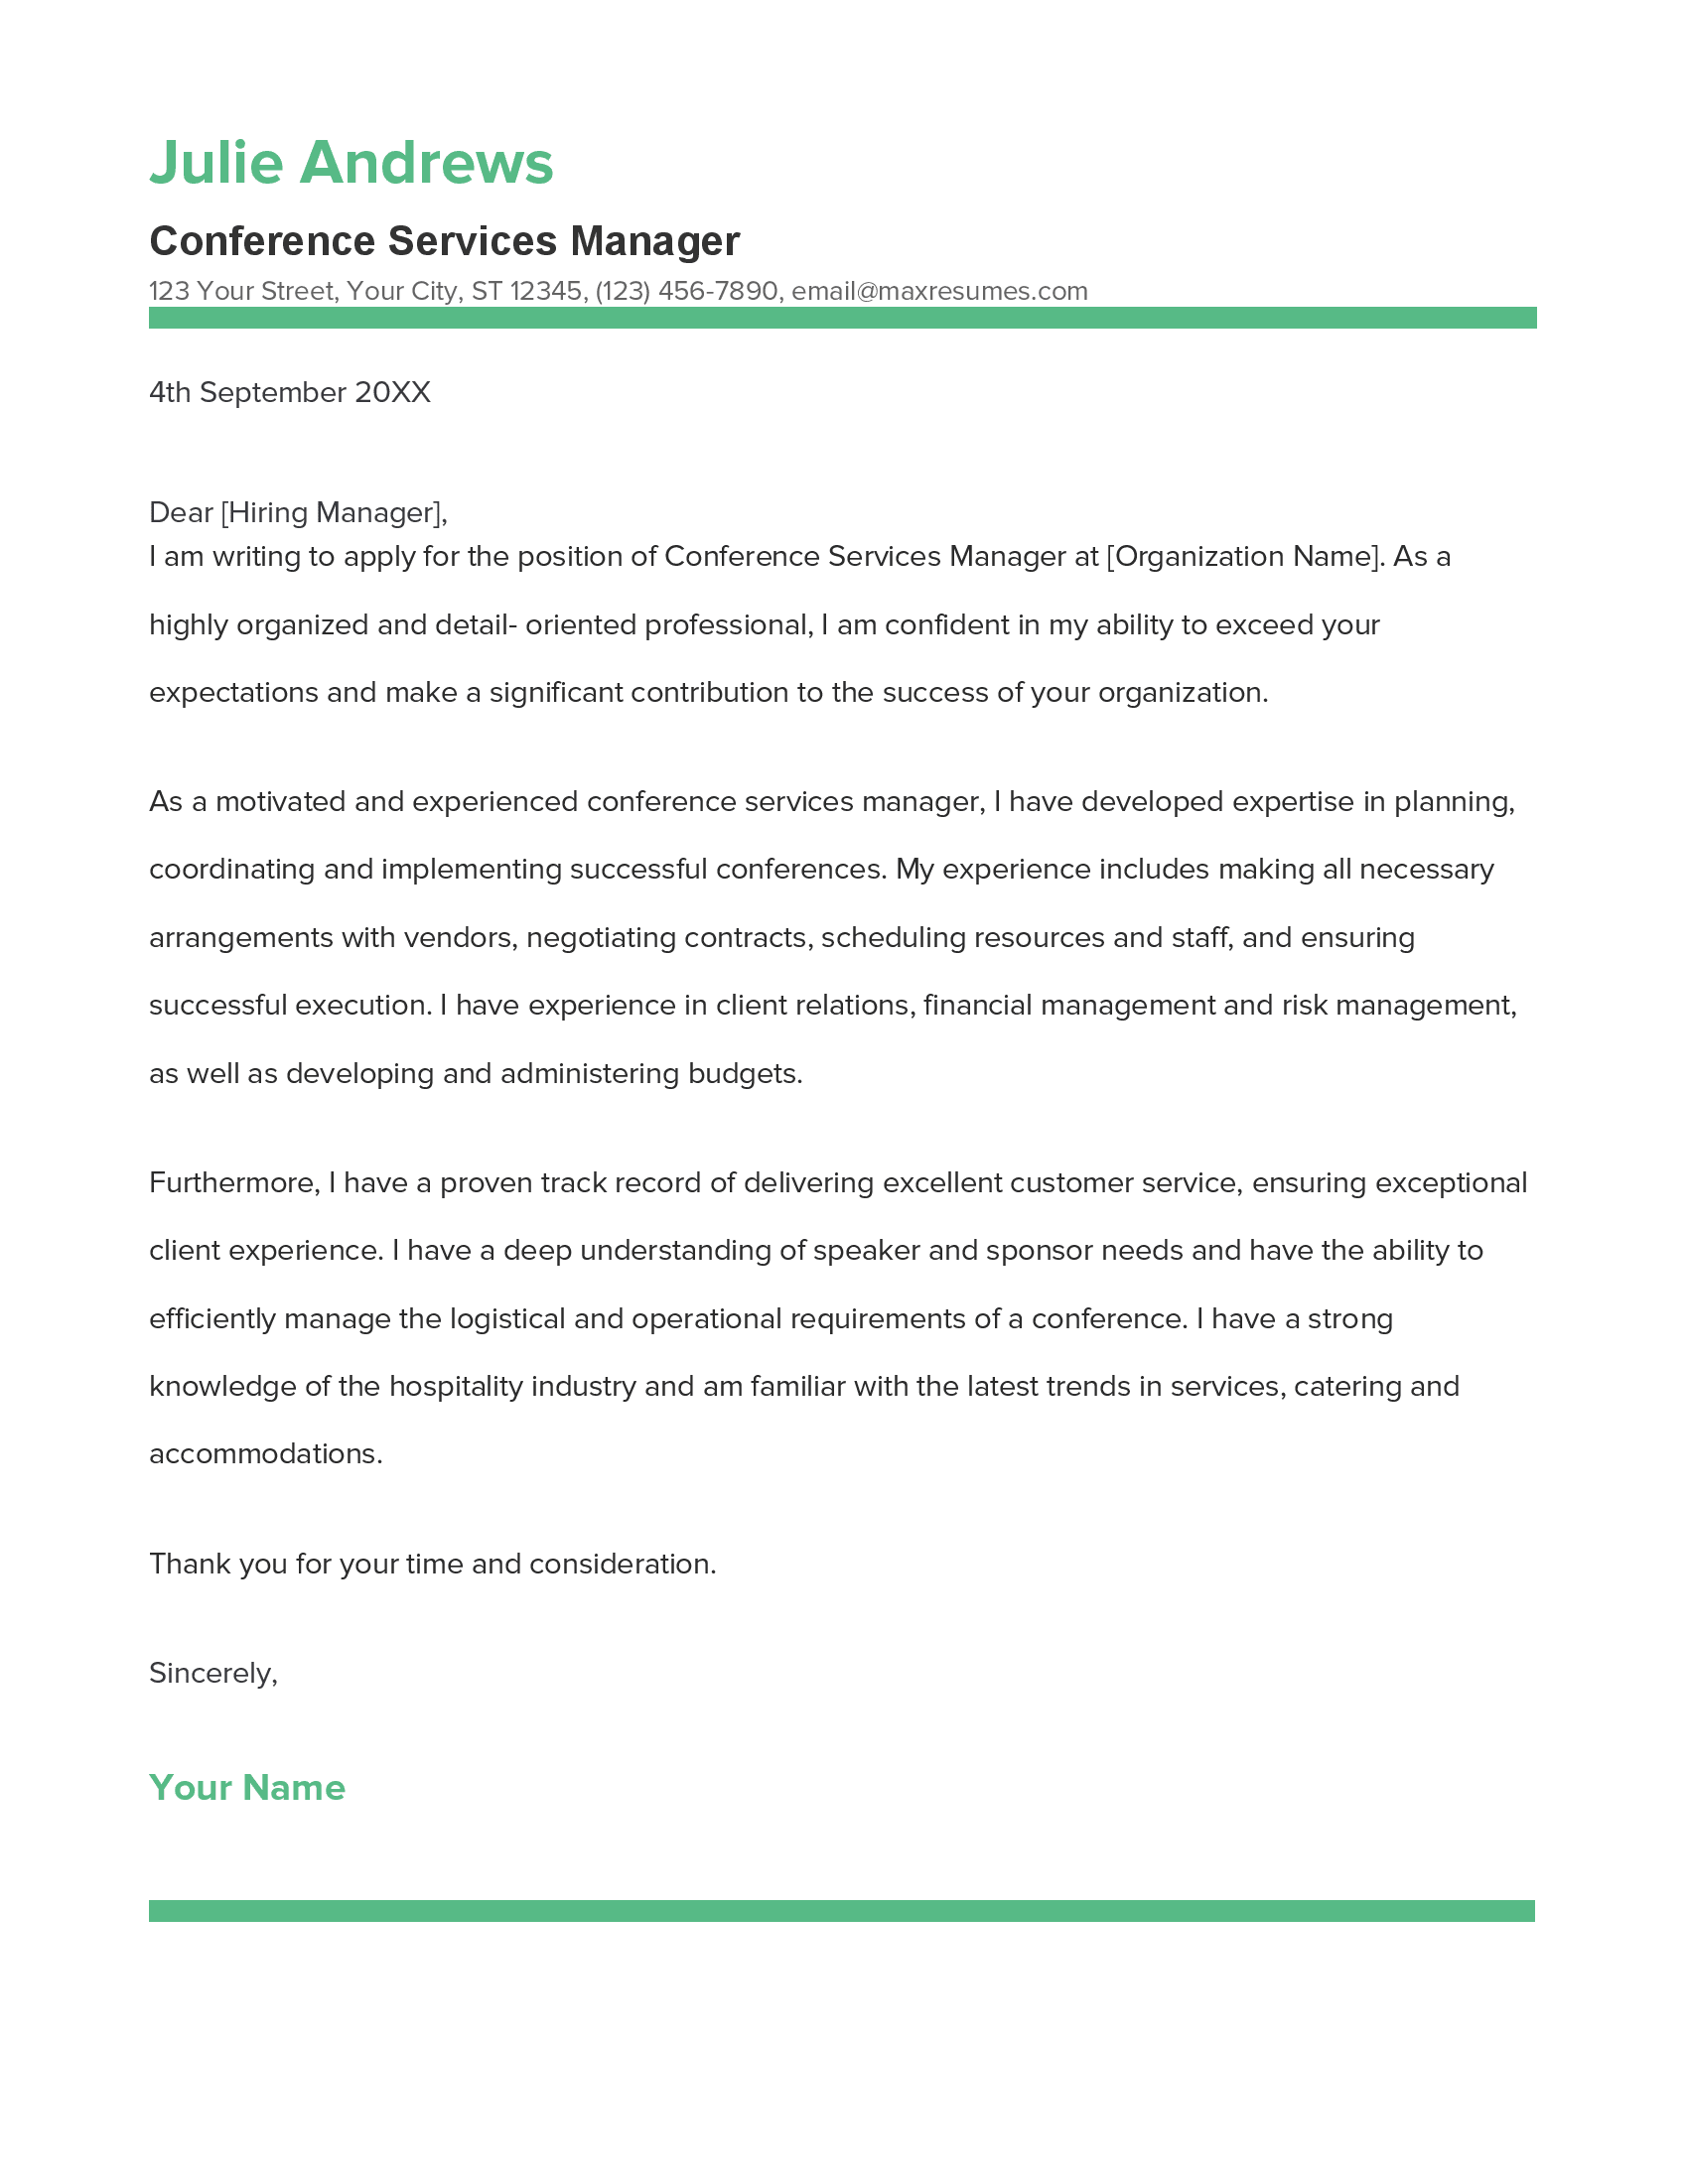 Conference Services Manager Cover Letter Example